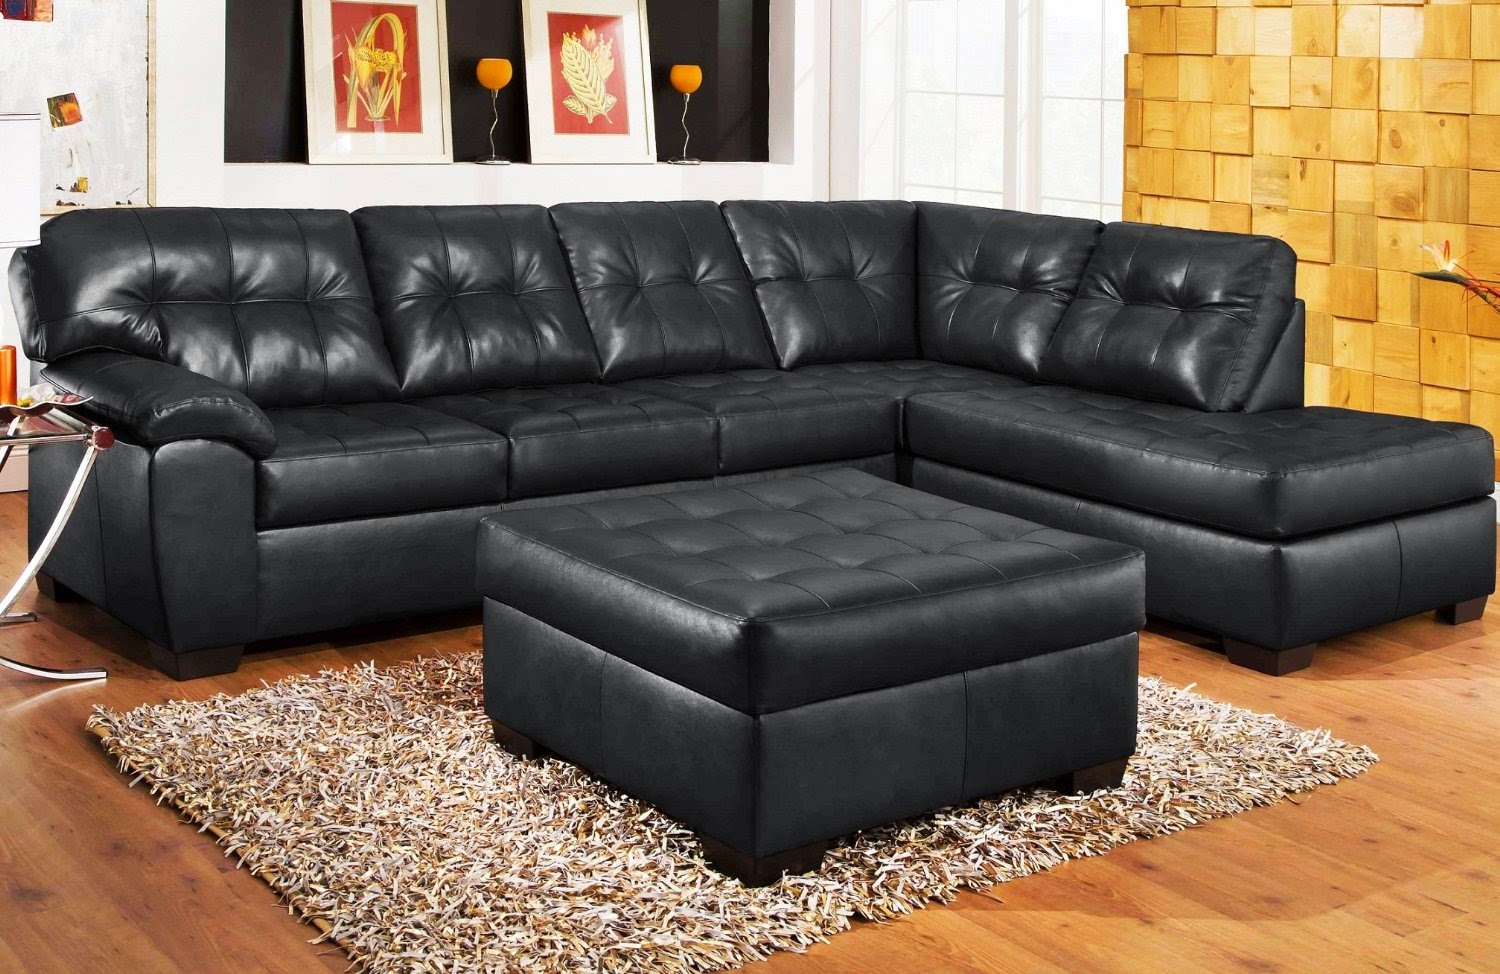  black  leather couch 